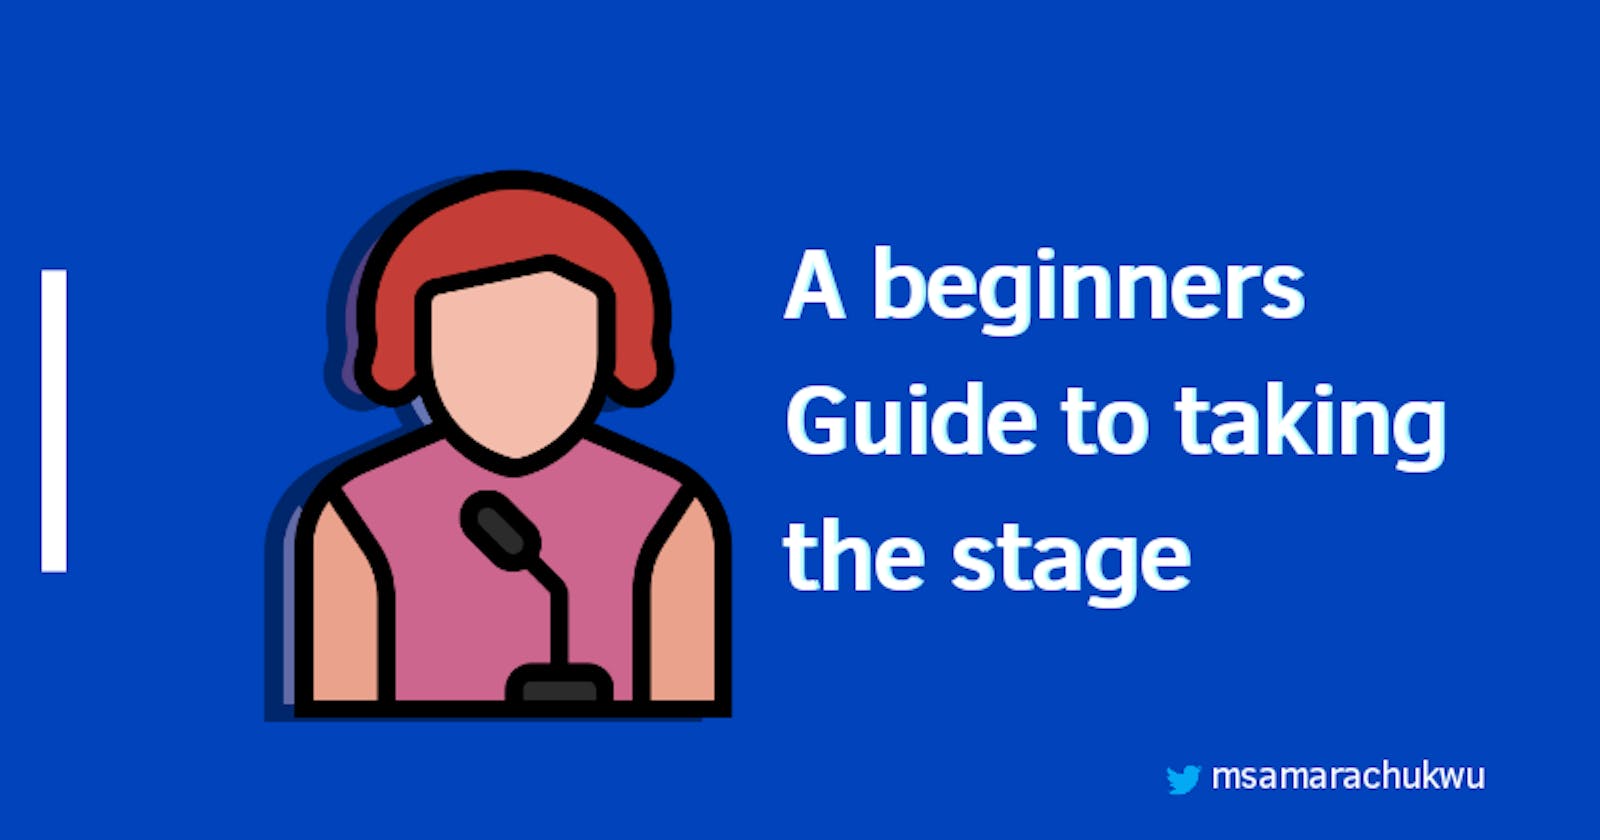 A beginners Guide to taking the stage